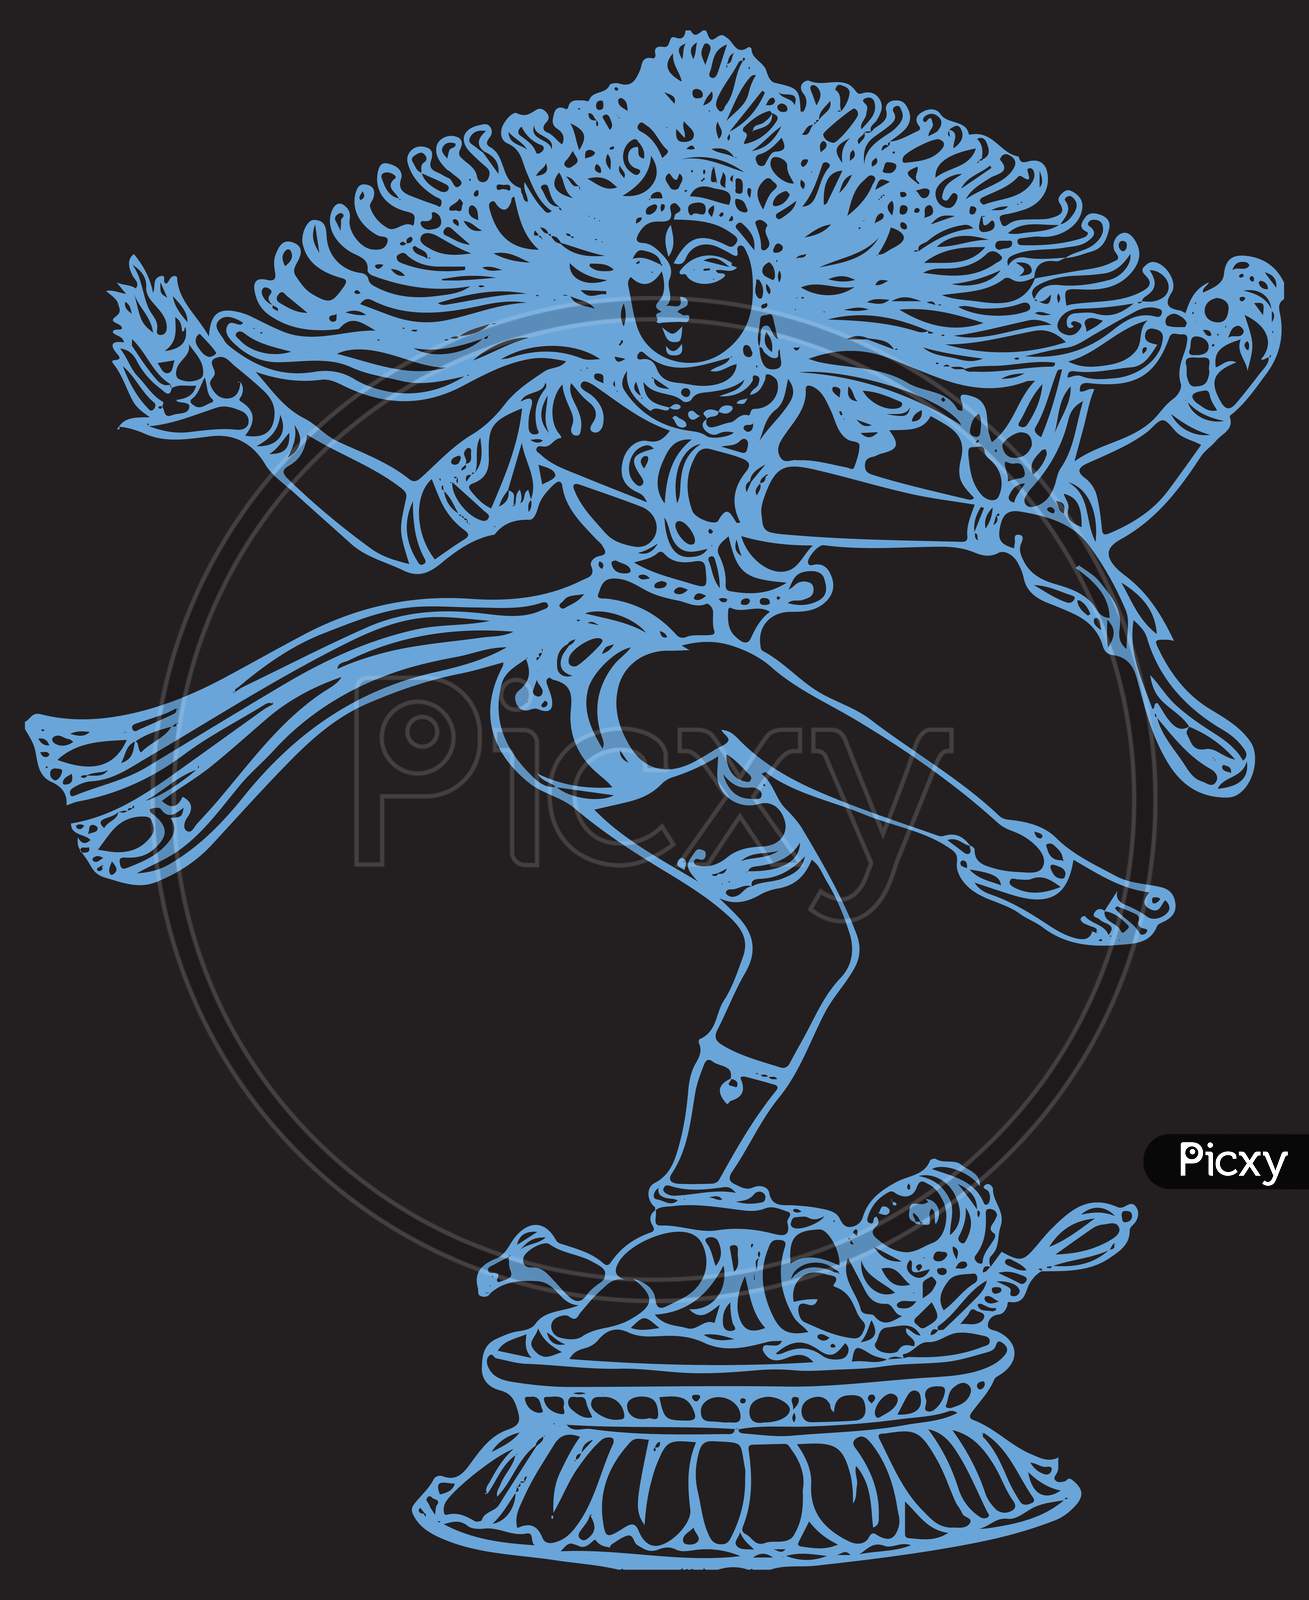 Vector Design Of Vintage Statue Of Indian Lord Shiva Nataraja Sculpture. It Is A Depiction Of The Hindu God Shiva As The Divine Dancer.